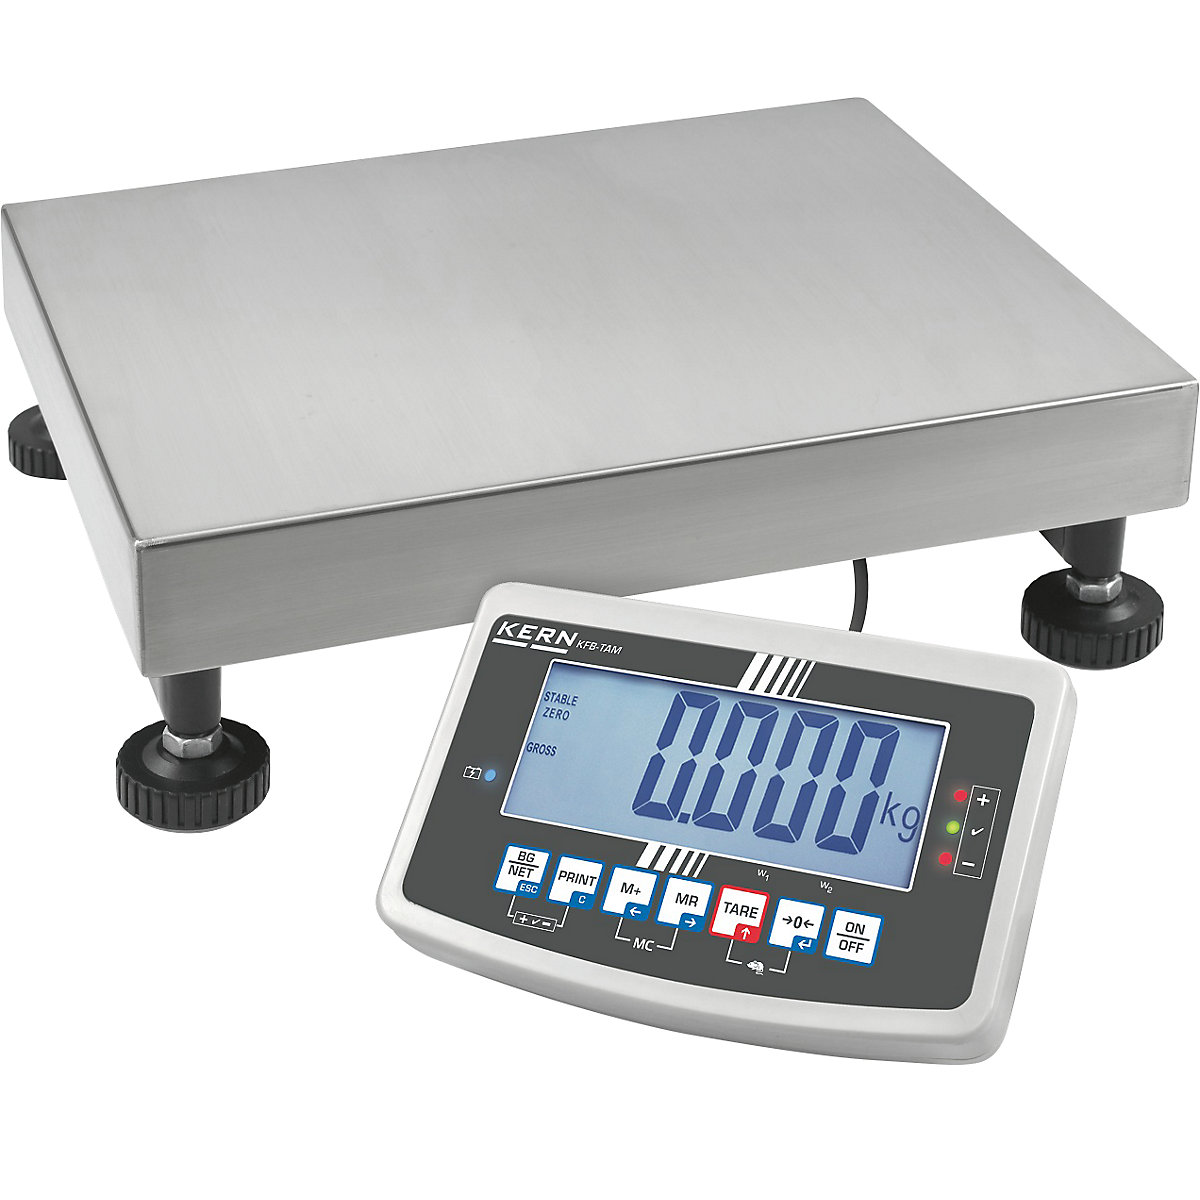 Industrial scales – KERN, dual range scales, can be calibrated, weighing range up to 30 kg, read-out accuracy 5 / 10 g, weighing plate 400 x 300 mm-2